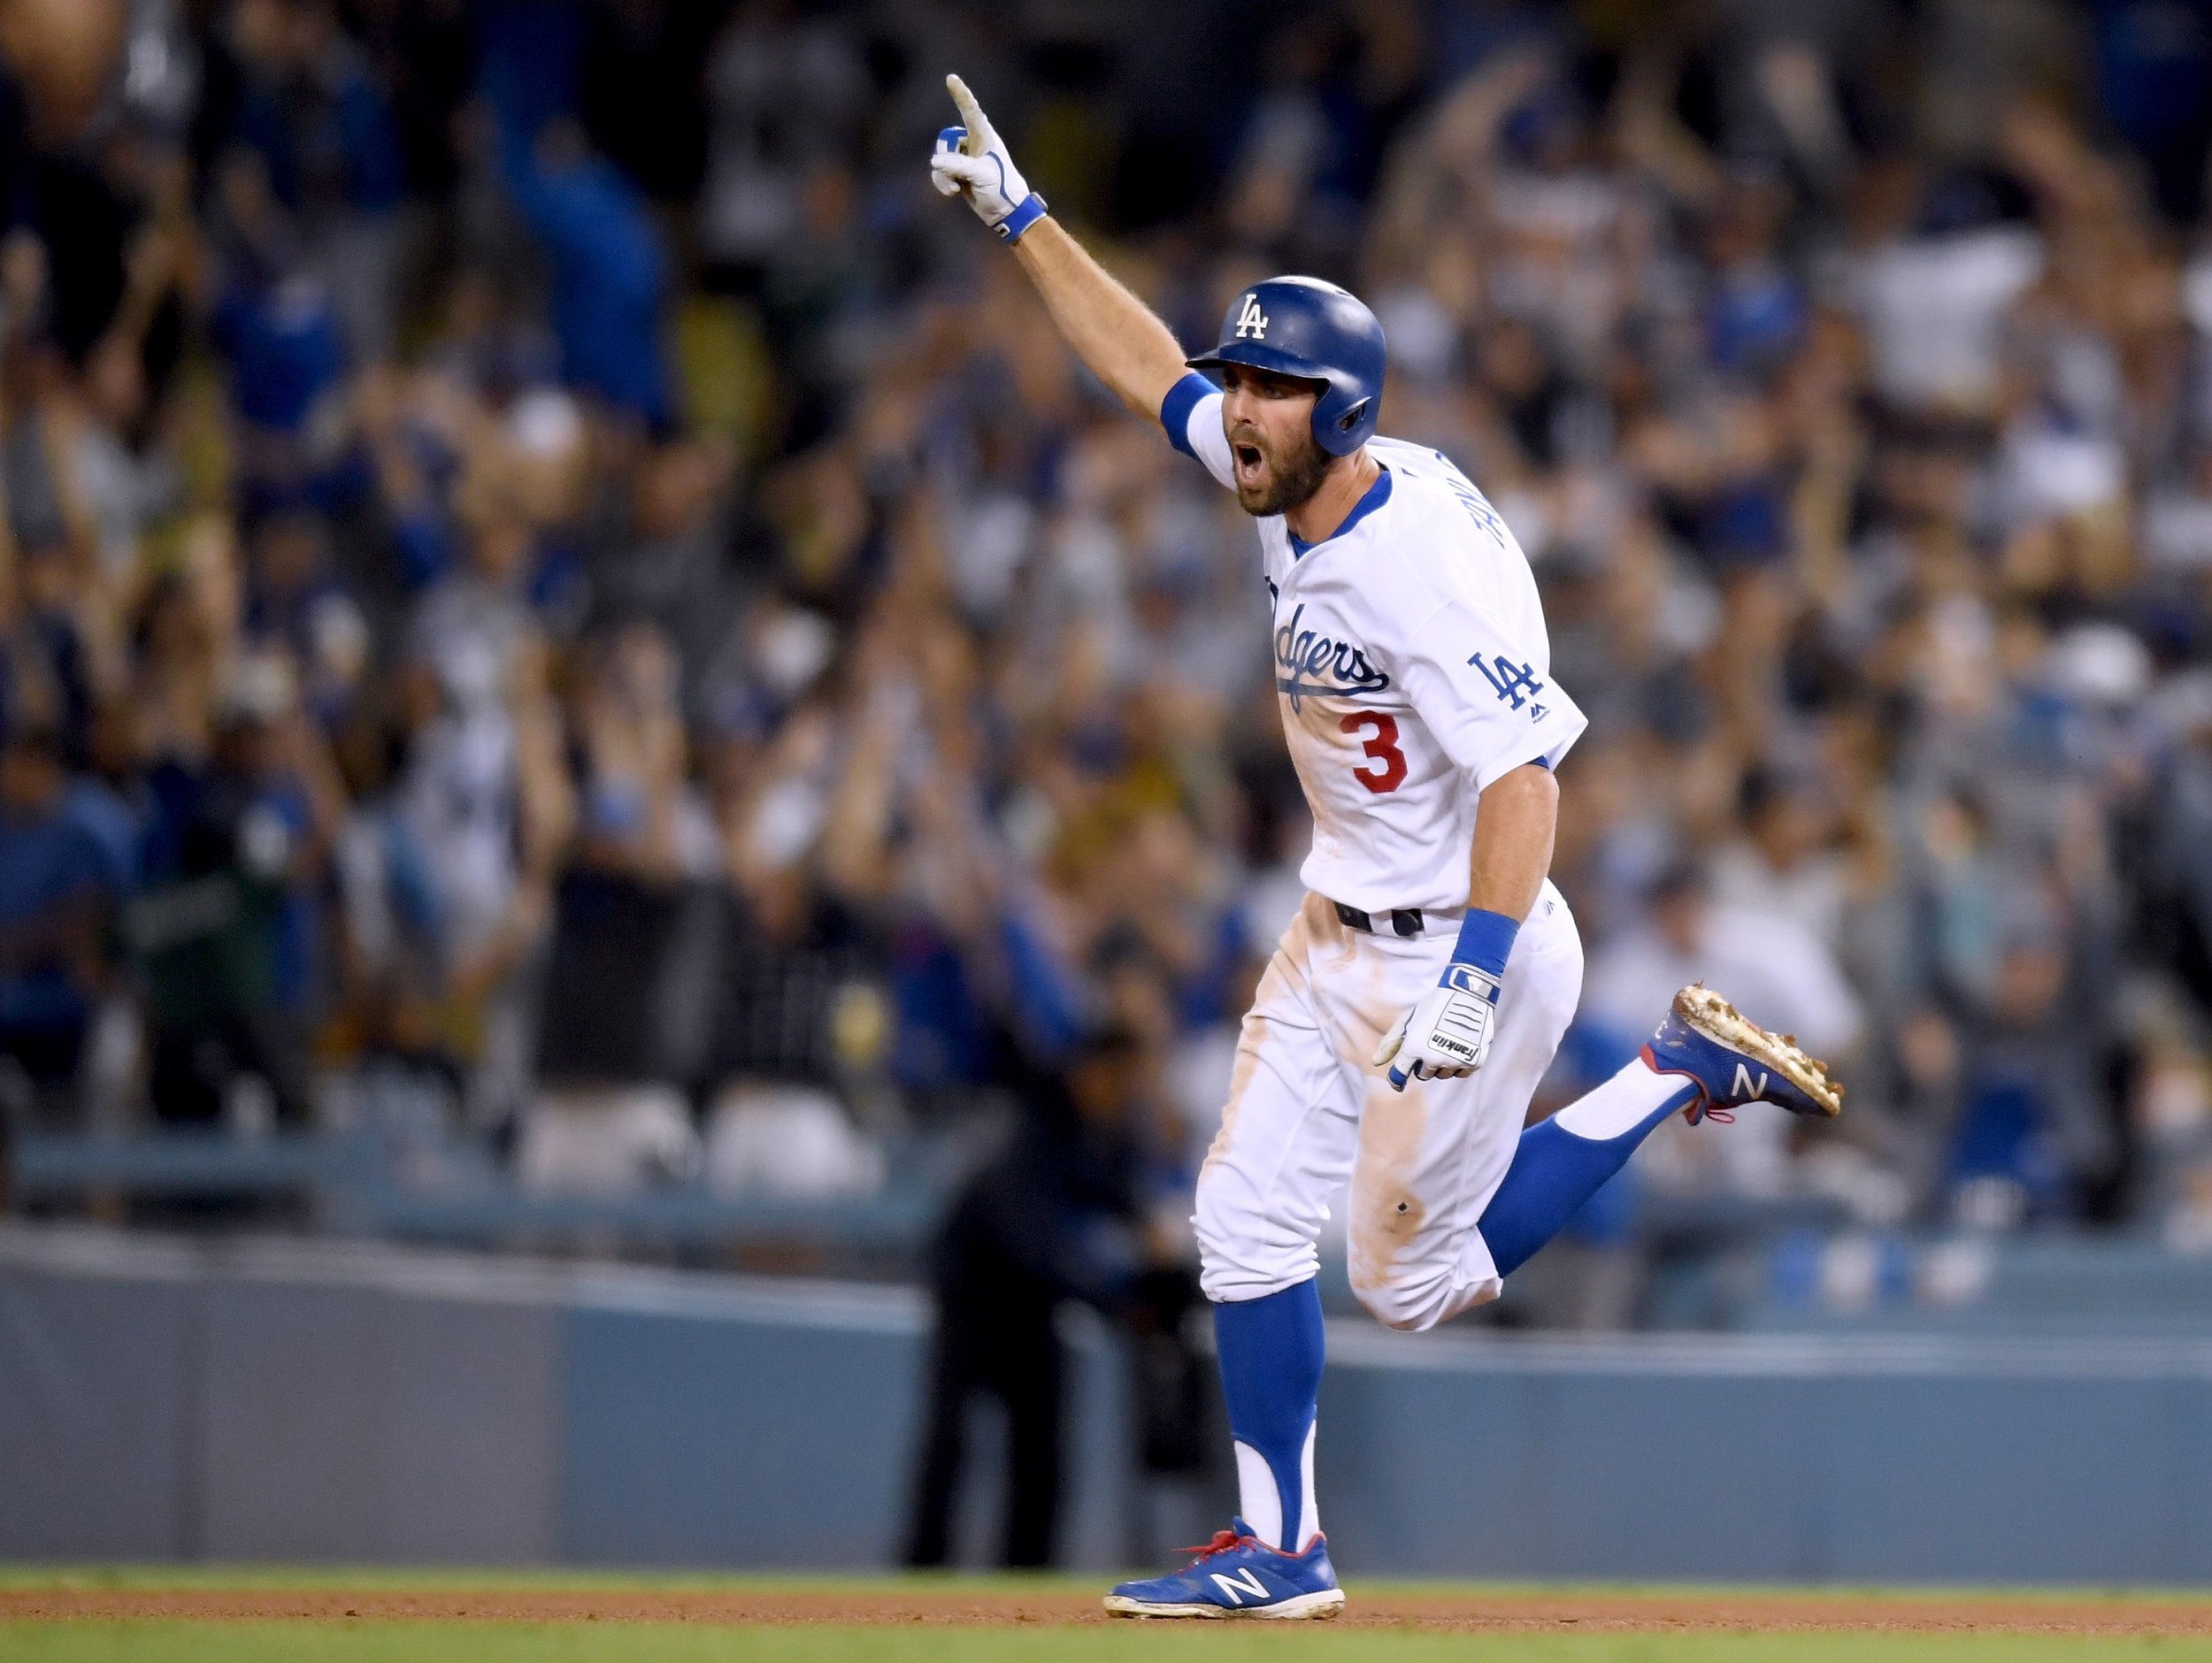 Dodgers react to walk-off in stunning video